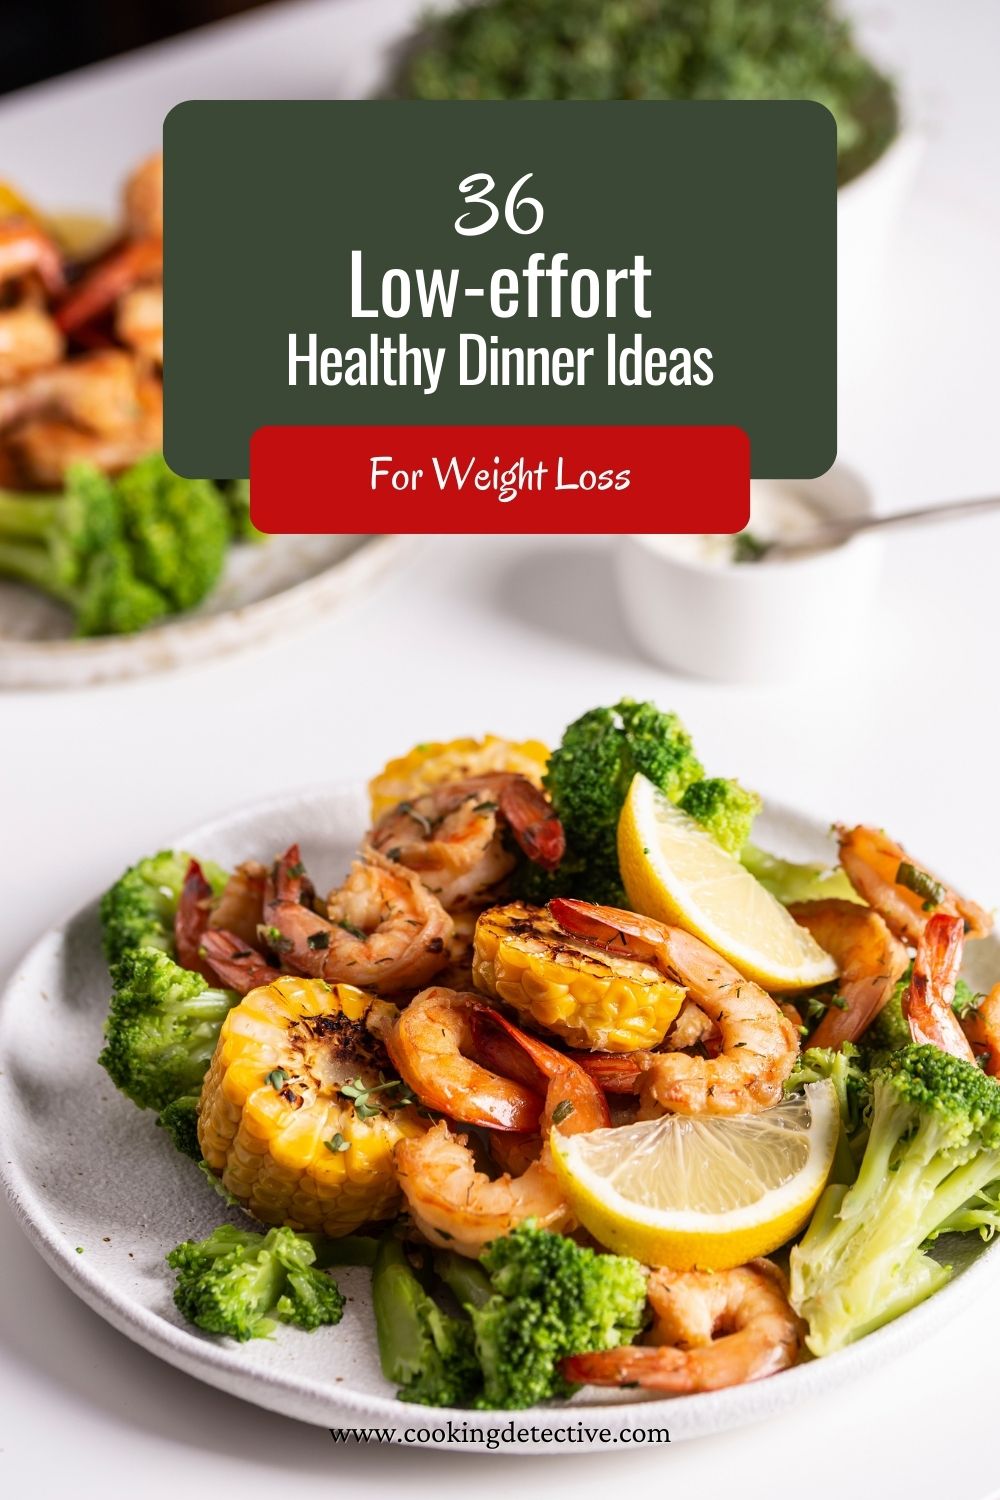 Low-effort and Healthy Dinner Ideas for Weight Loss